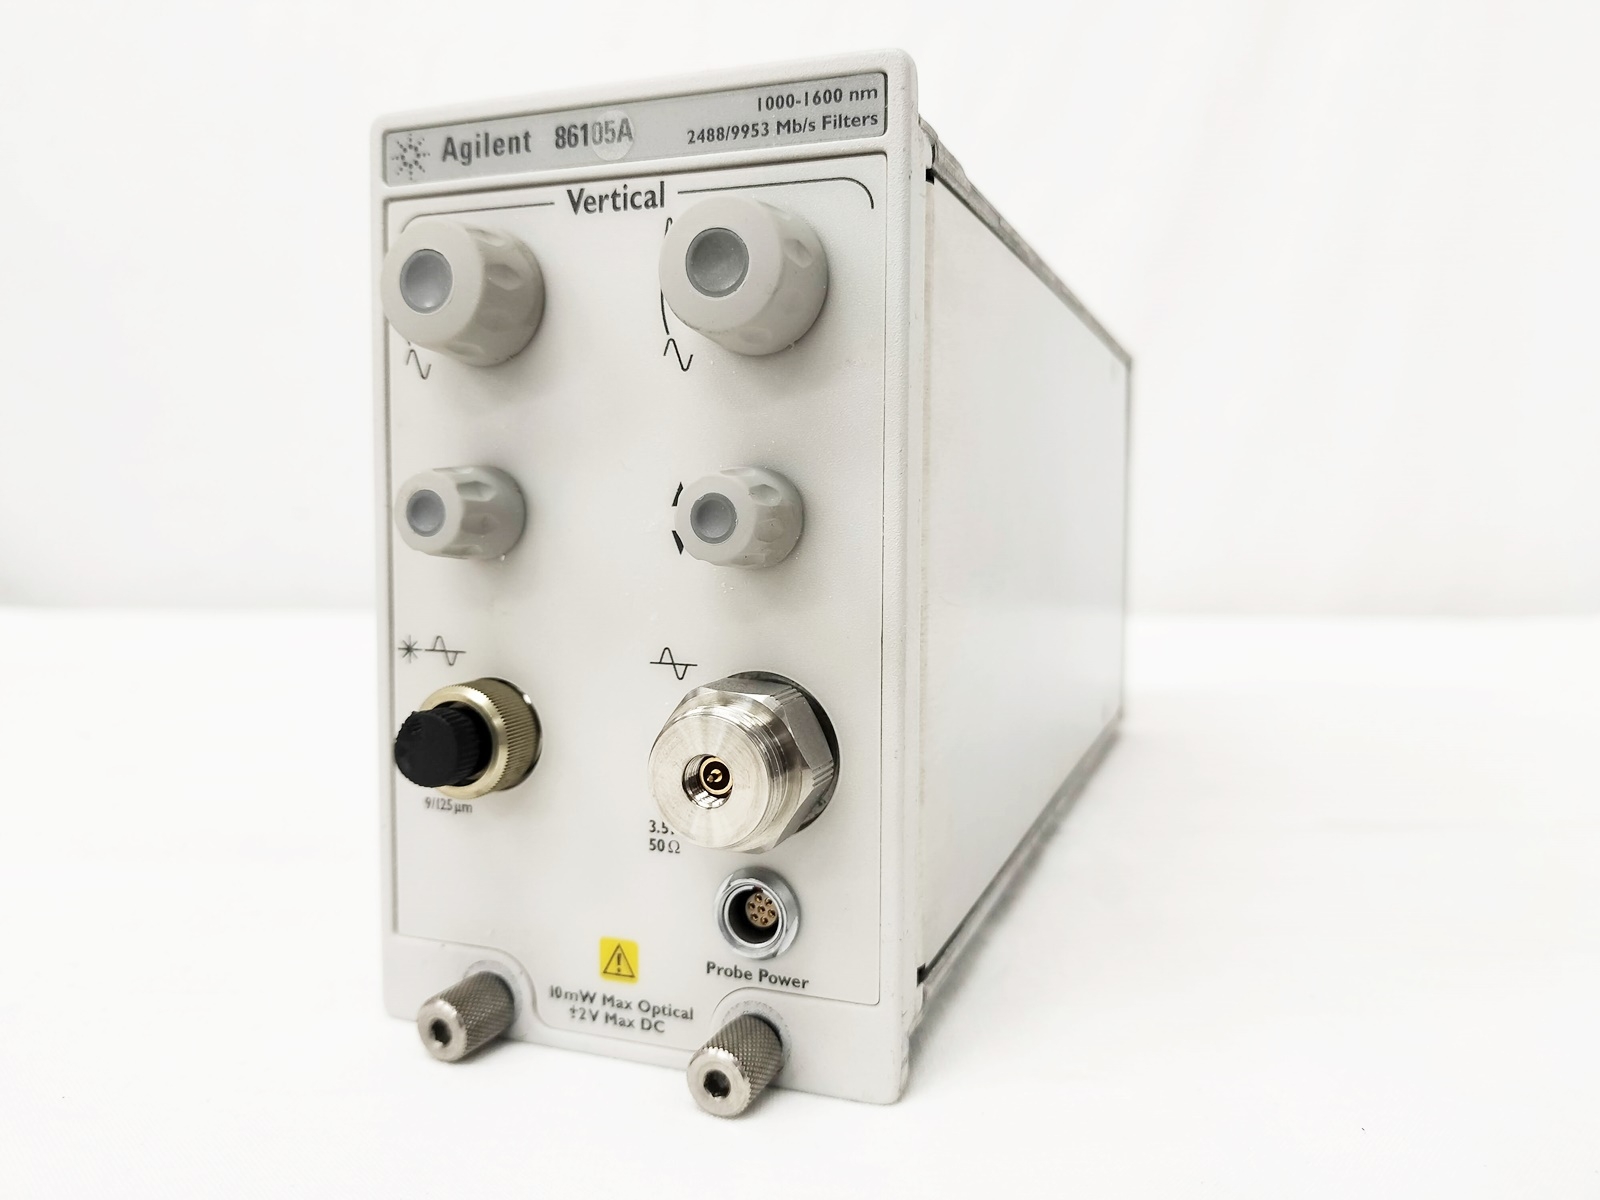 [DW]8日保証 86105A Agilent OPT 201 1000-1600nm アジレント hp Keysight 622/2488Mb/s Filter Optical/Electrical Module...[05791-1426]